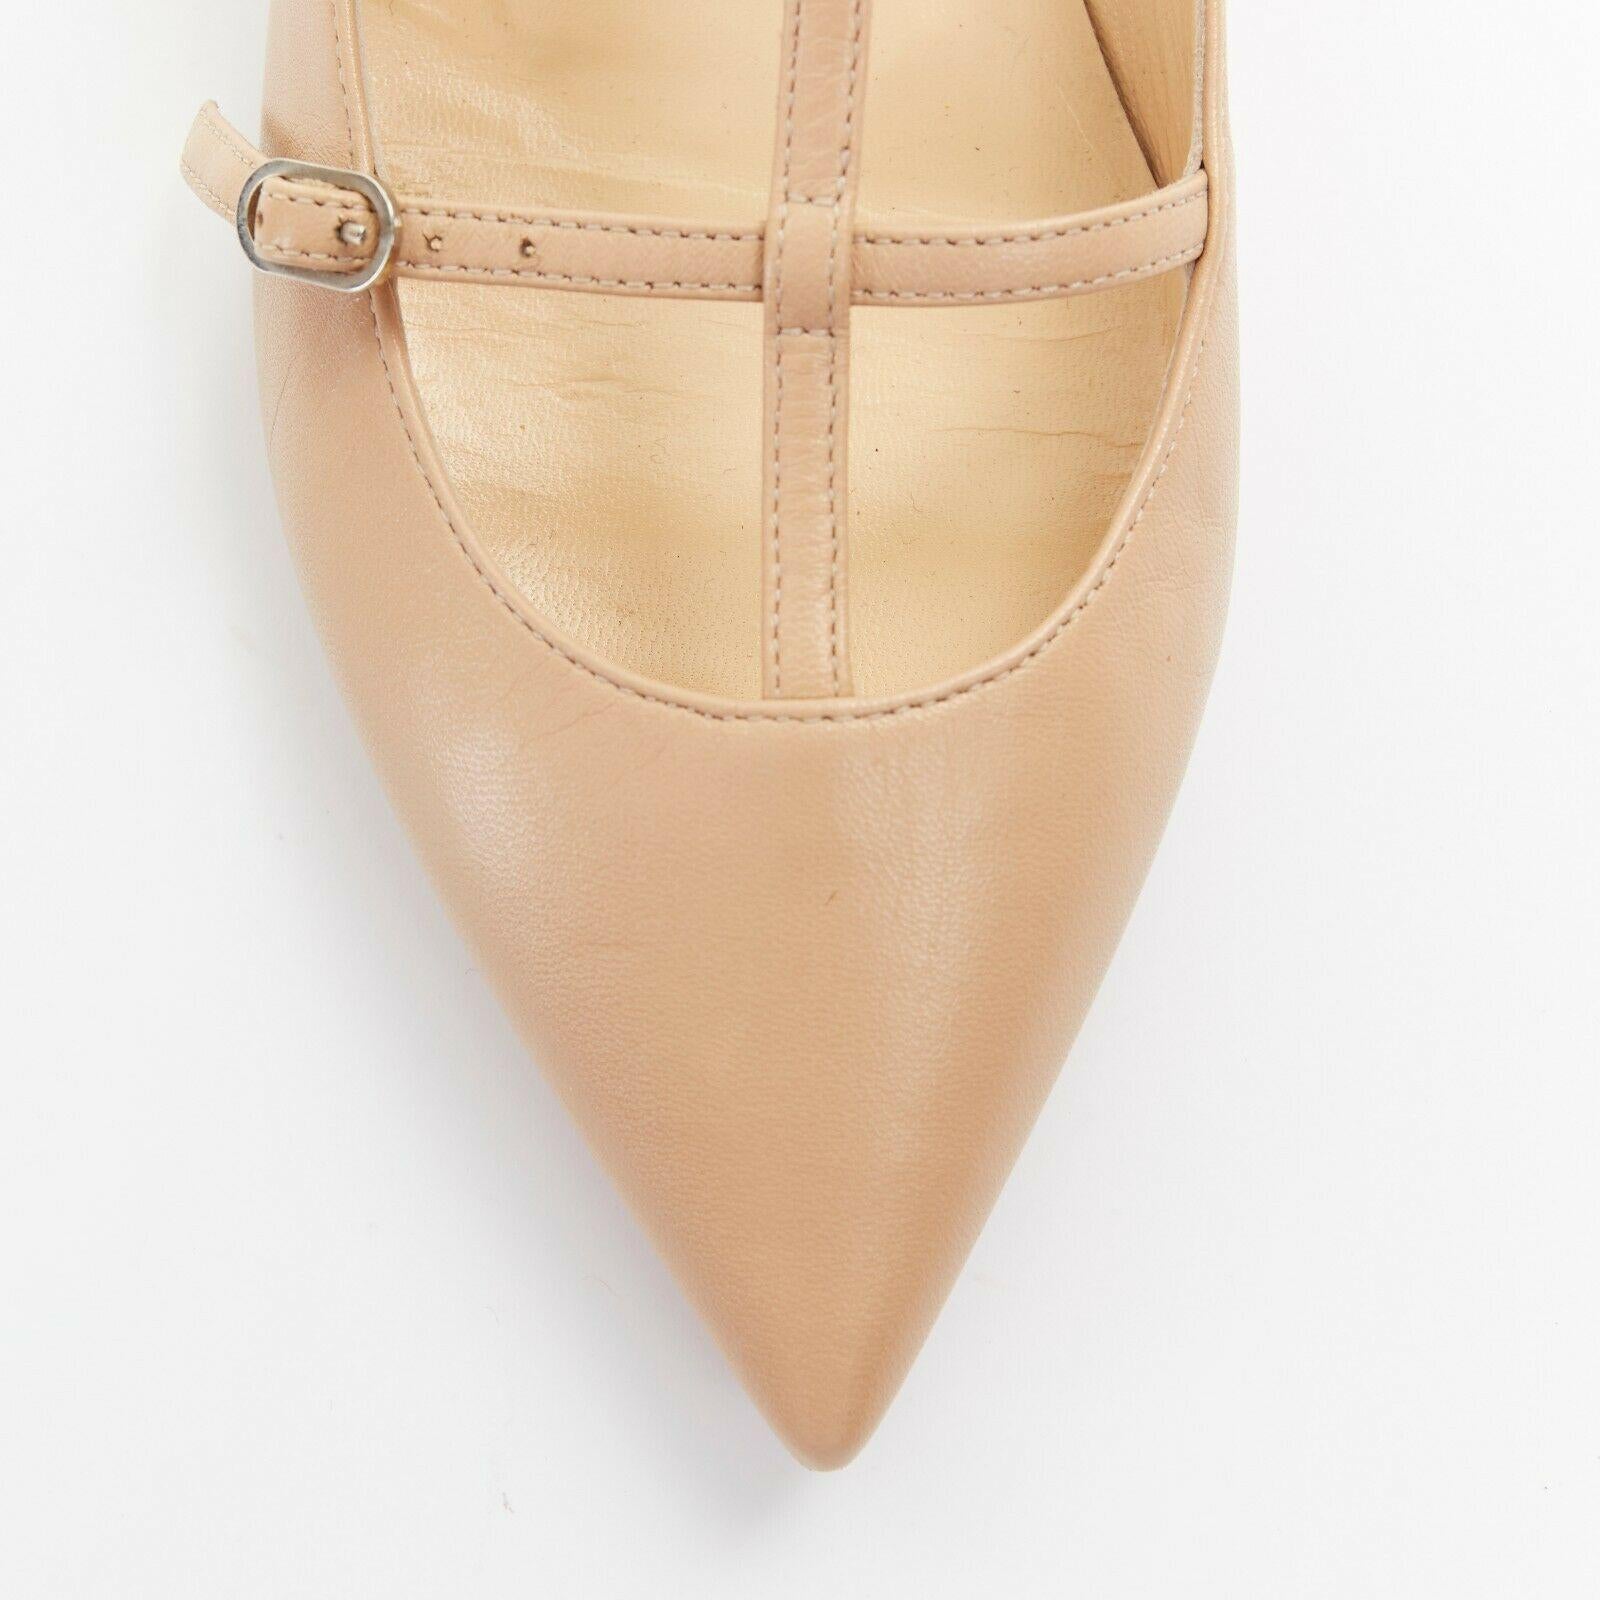 new CHRISTIAN LOUBOUTIN Toerless Muse nude point toe gladiator caged flats EU35 2